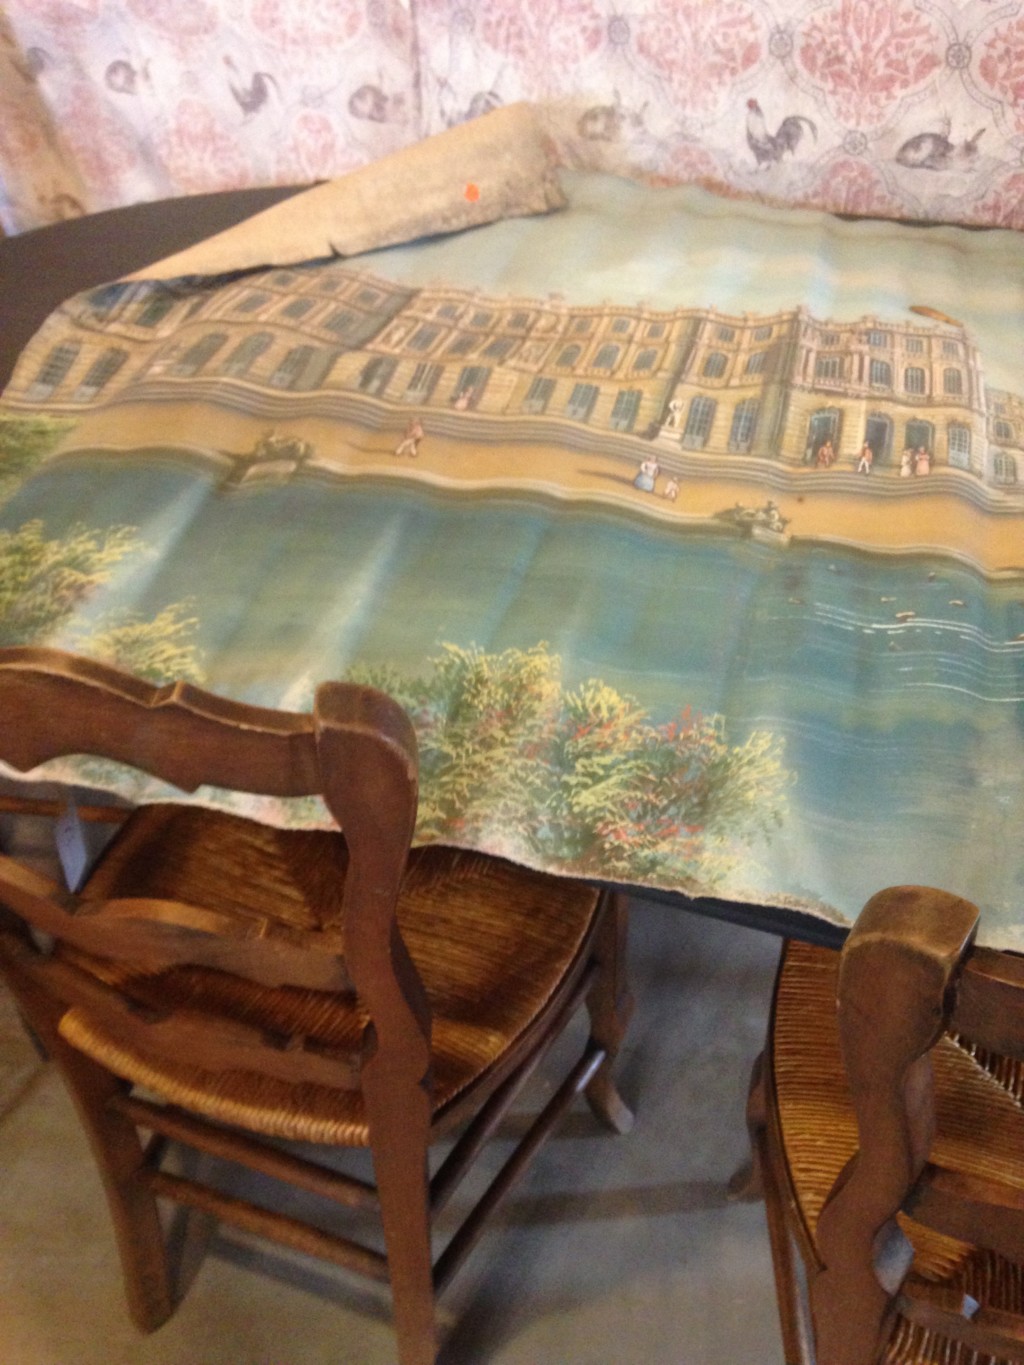 This piece just tickles me. It's a 4' wide canvas depicting Versailles circa 1900. I'm not sure if it's a prop or promotional image. But it's just so cool!